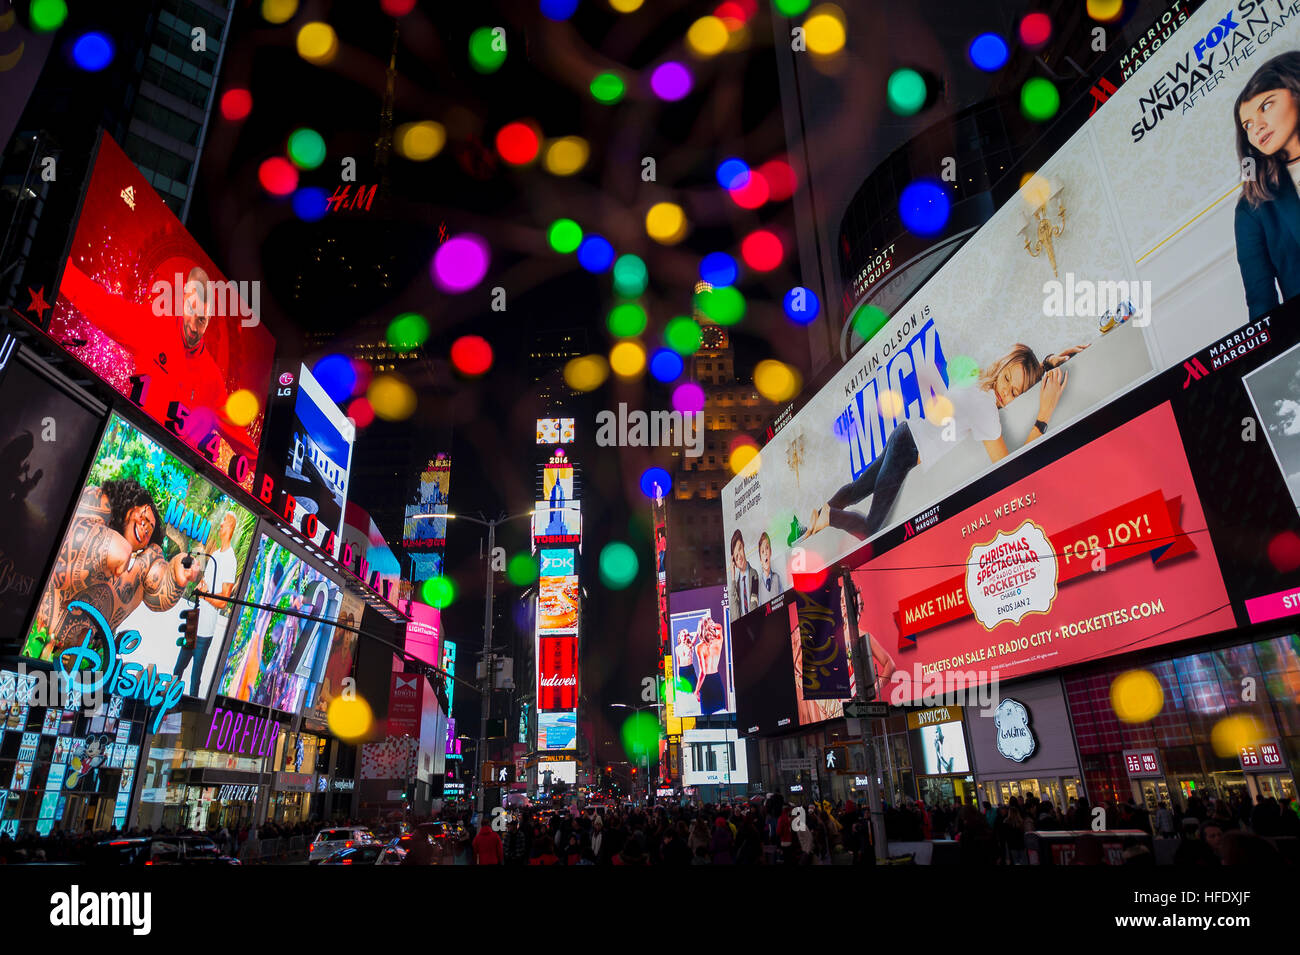 NEW YORK CITY - DECEMBER 23, 2016: Colorful lights decorate Times Square as the city prepares for New Year's Eve celebrations. Stock Photo